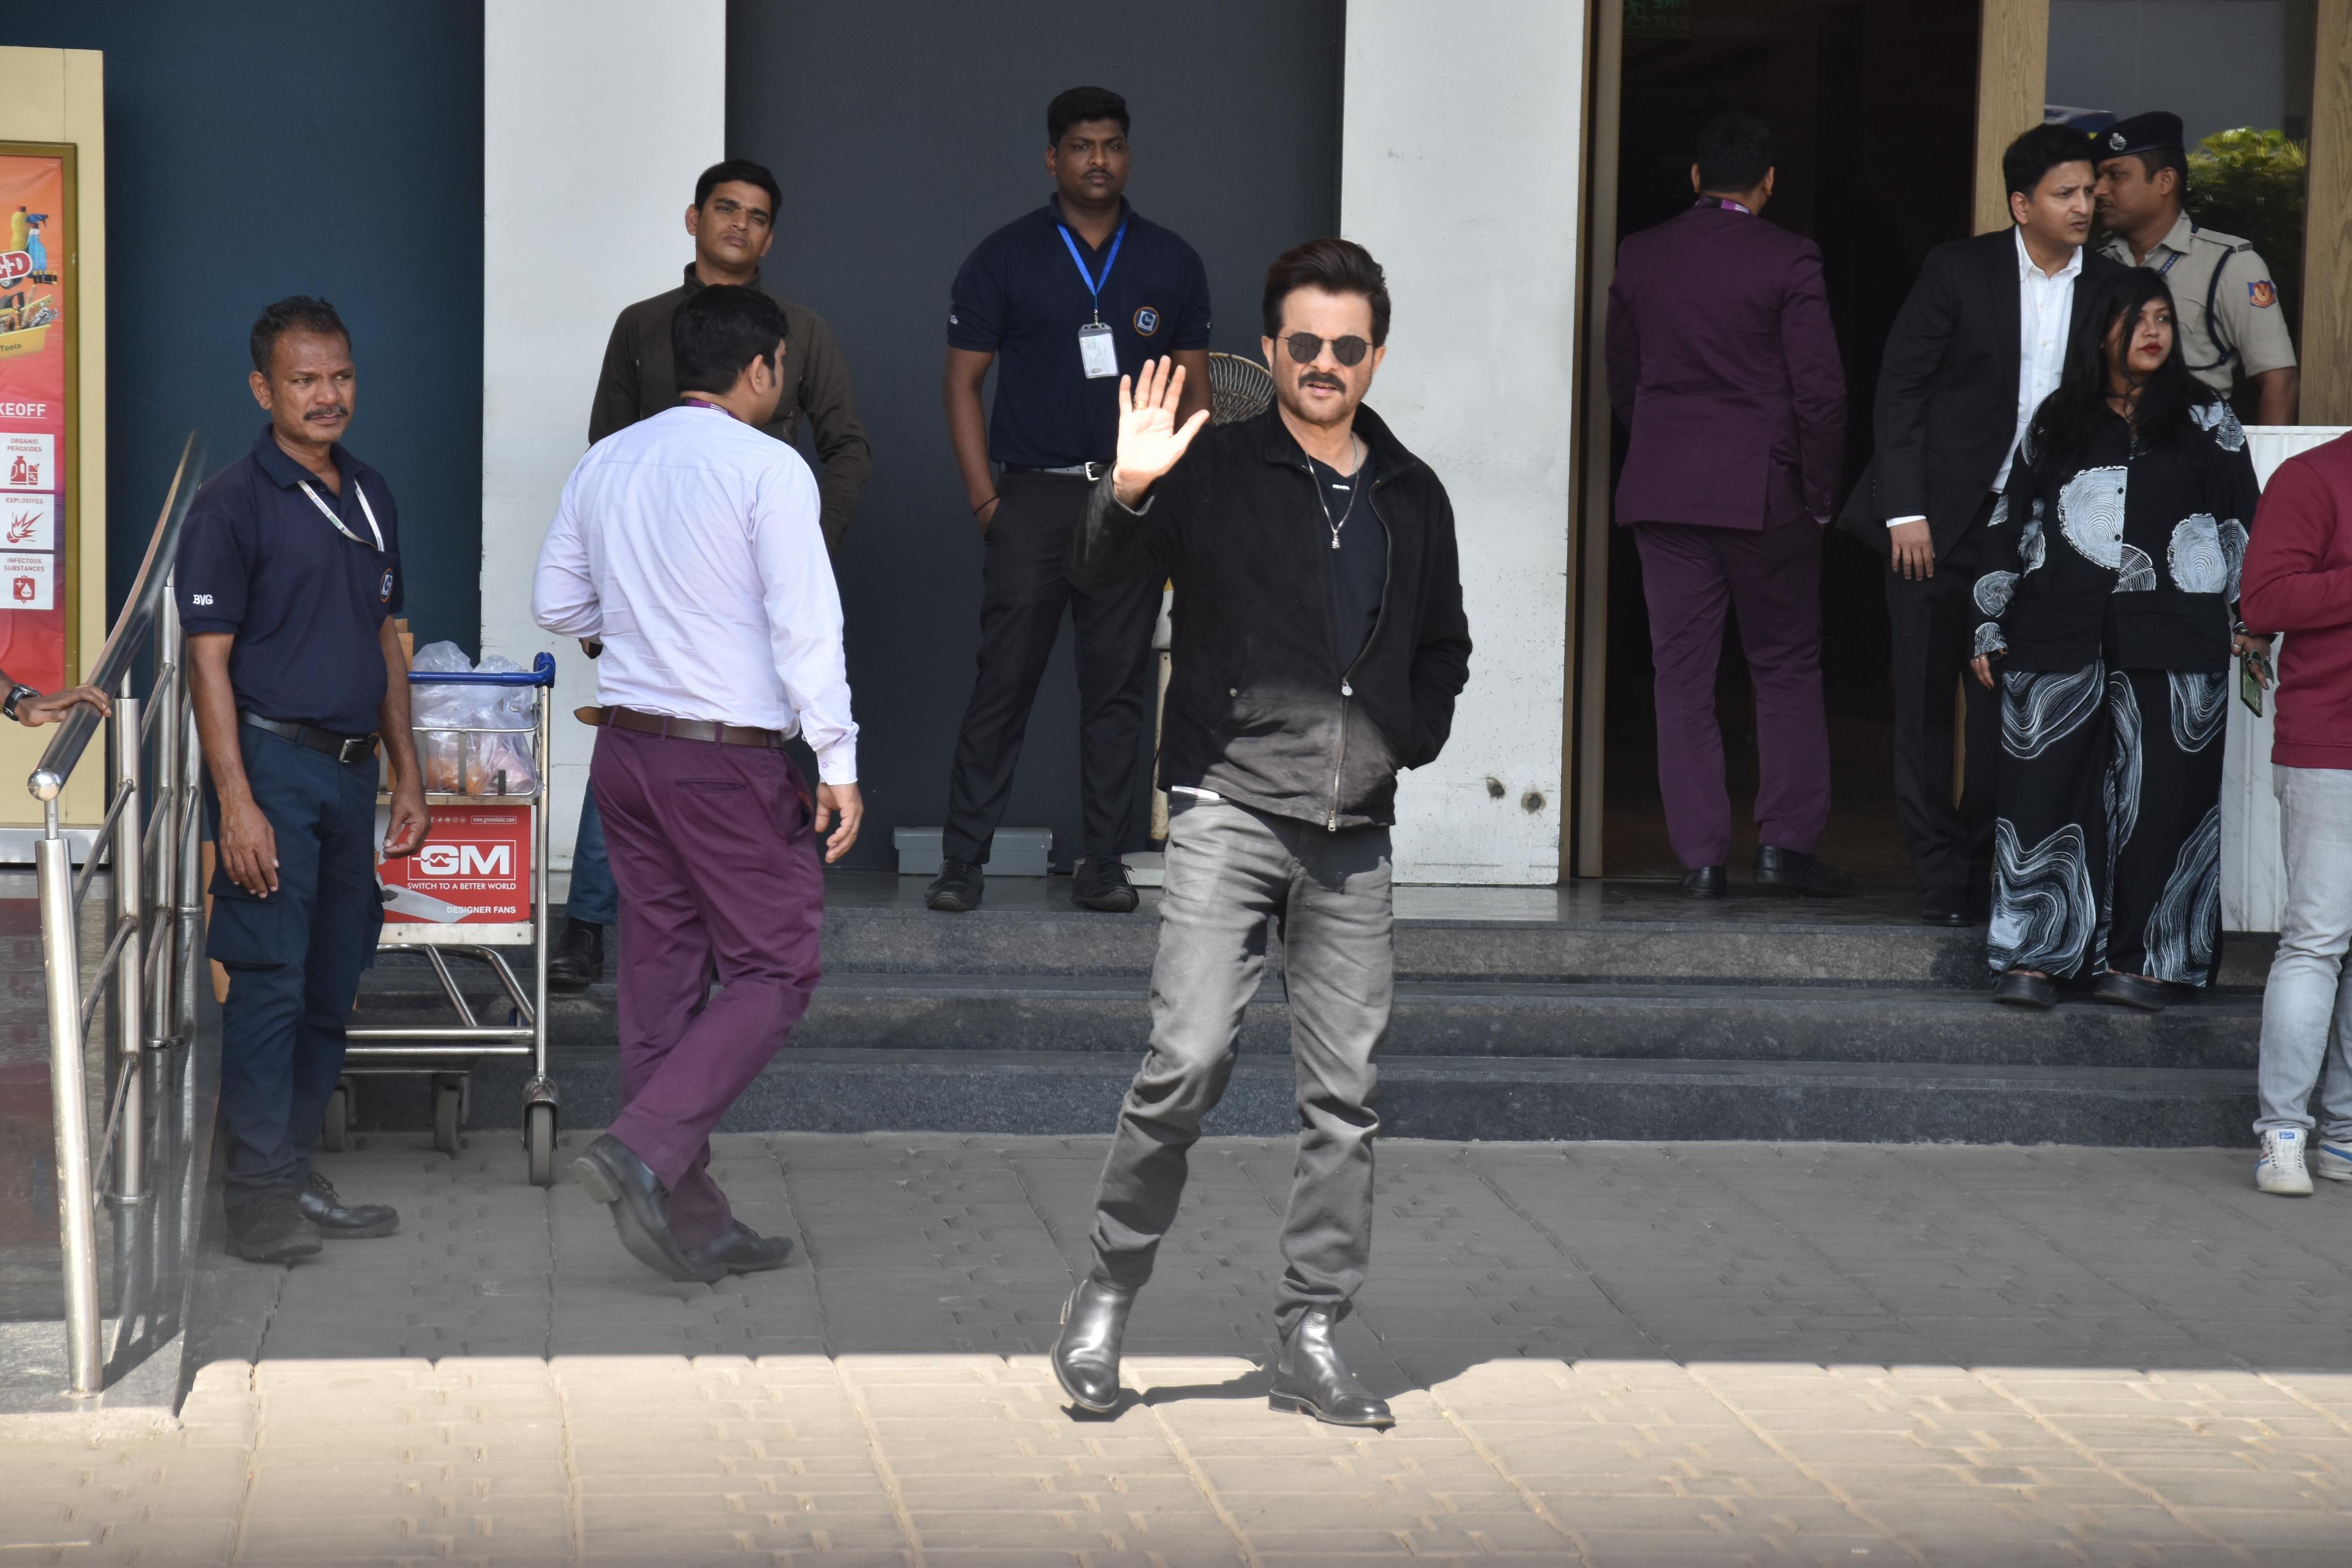 Anil Kapoor was also clicked at the Kalina airport, joining his comrades on their way for 'Fighter' promotions